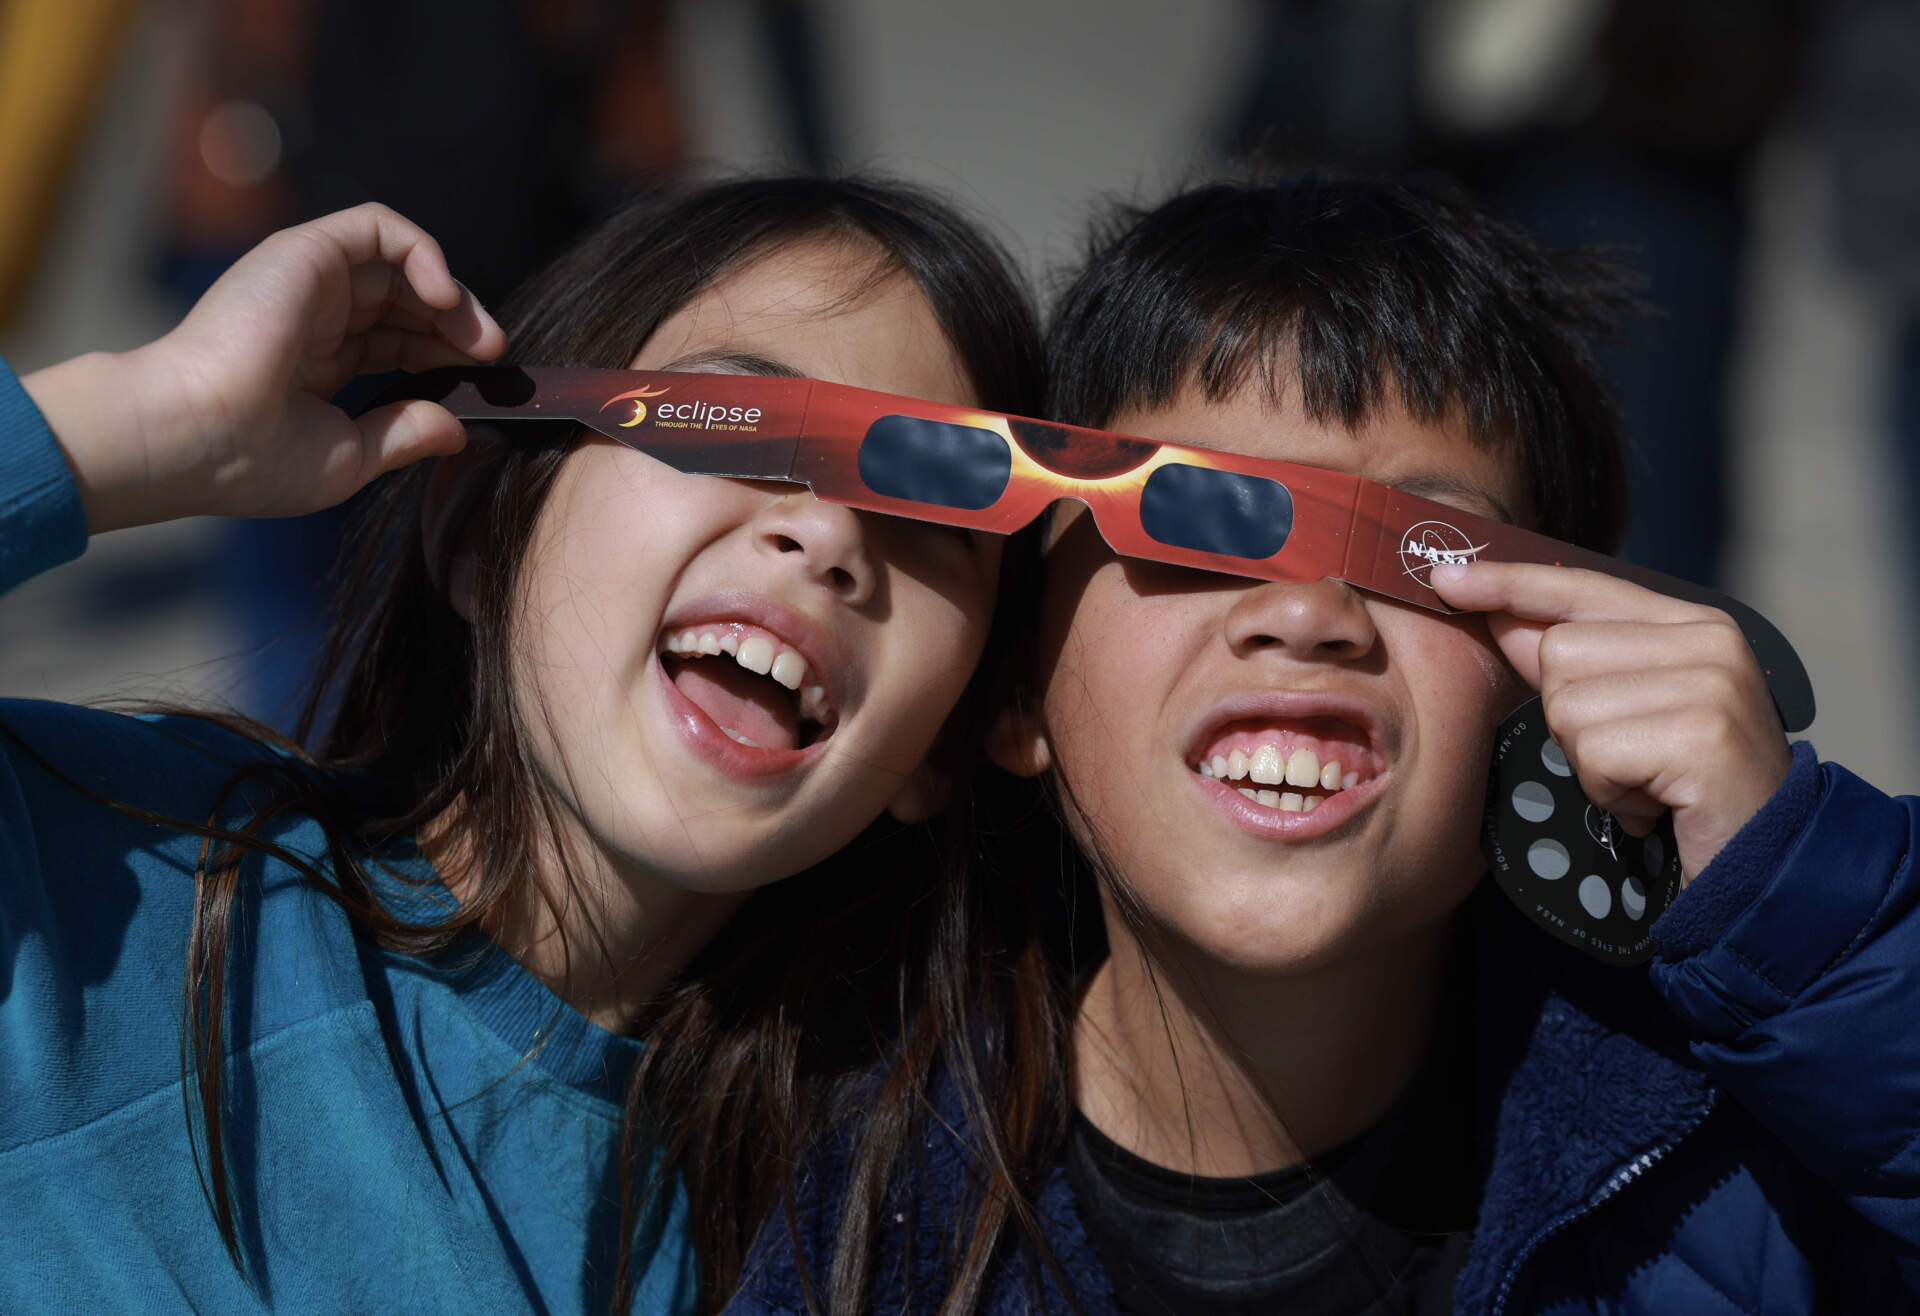 Miriam Toy and Oliver Toy share a pair of eclipse glasses that NASA was handing out as they await the eclipse on April 08, 2024, in Houlton, Maine. (Joe Raedle/Getty Images)